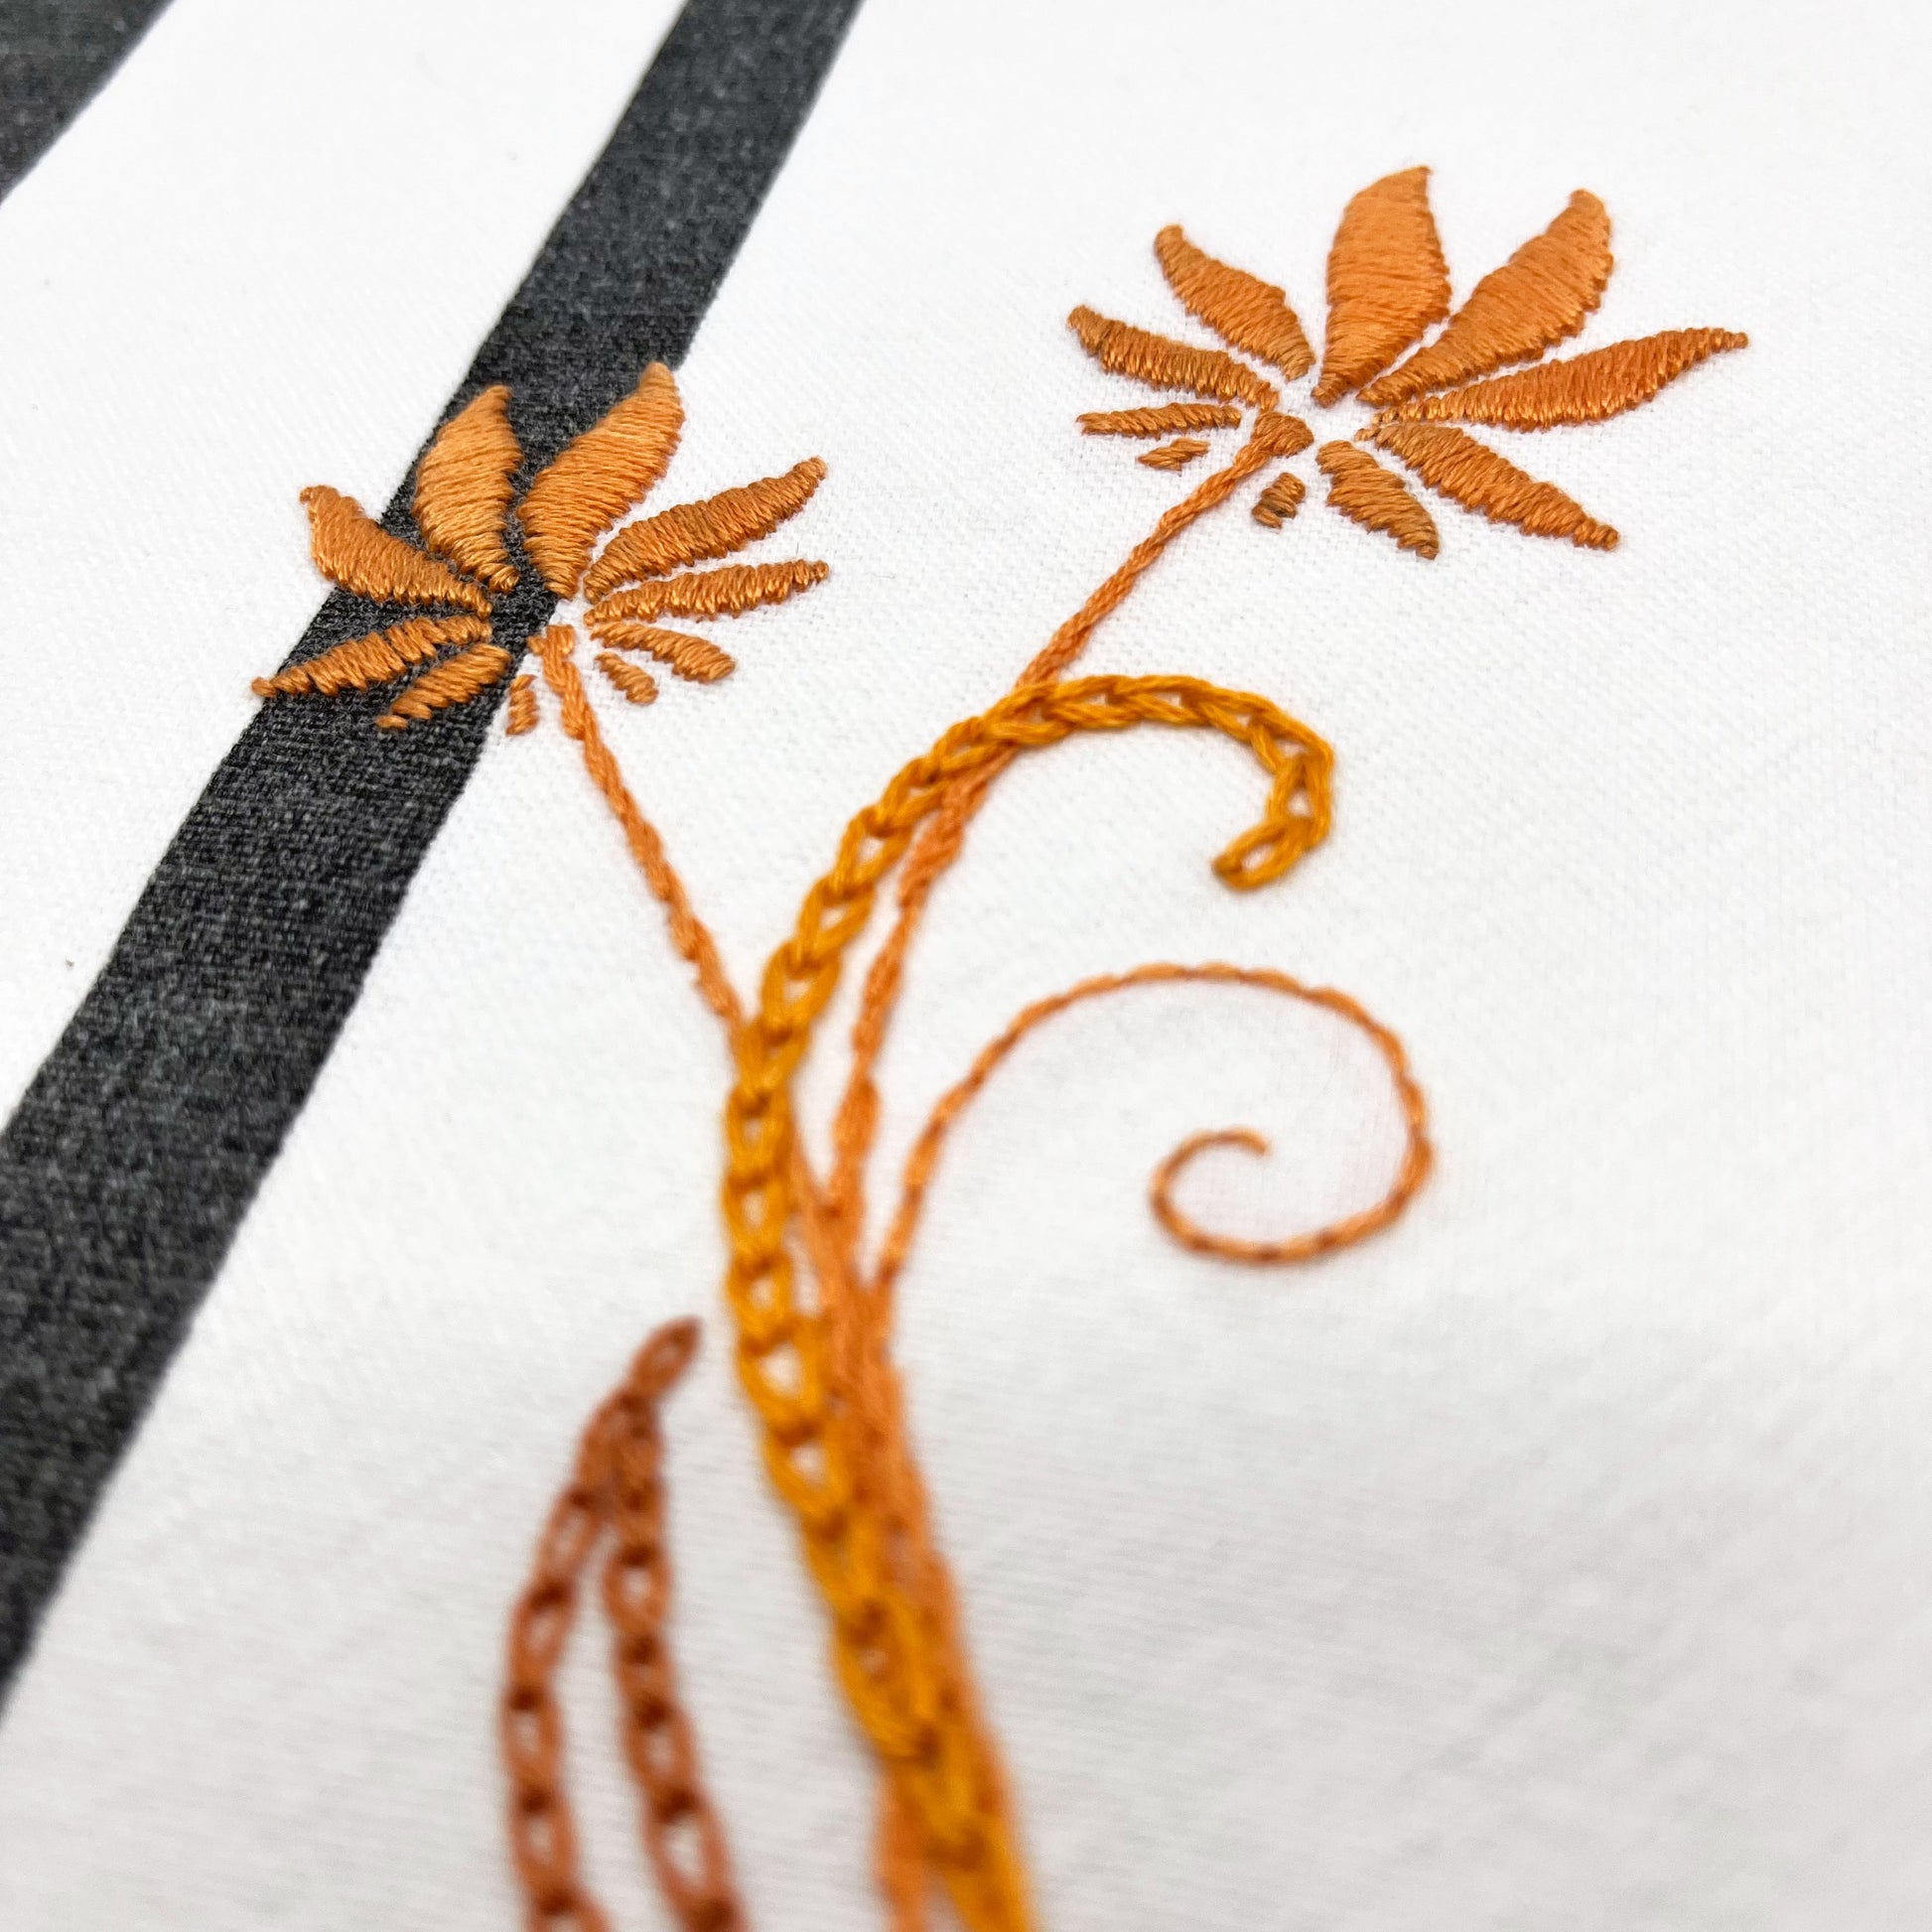 close up angled view of a fabric wall hanging made out of white fabric with black vertical stripes, hand stitched with flowers in shades of orange with long curvy stems in chainstitch, backstitch and stem stitch, on a white background